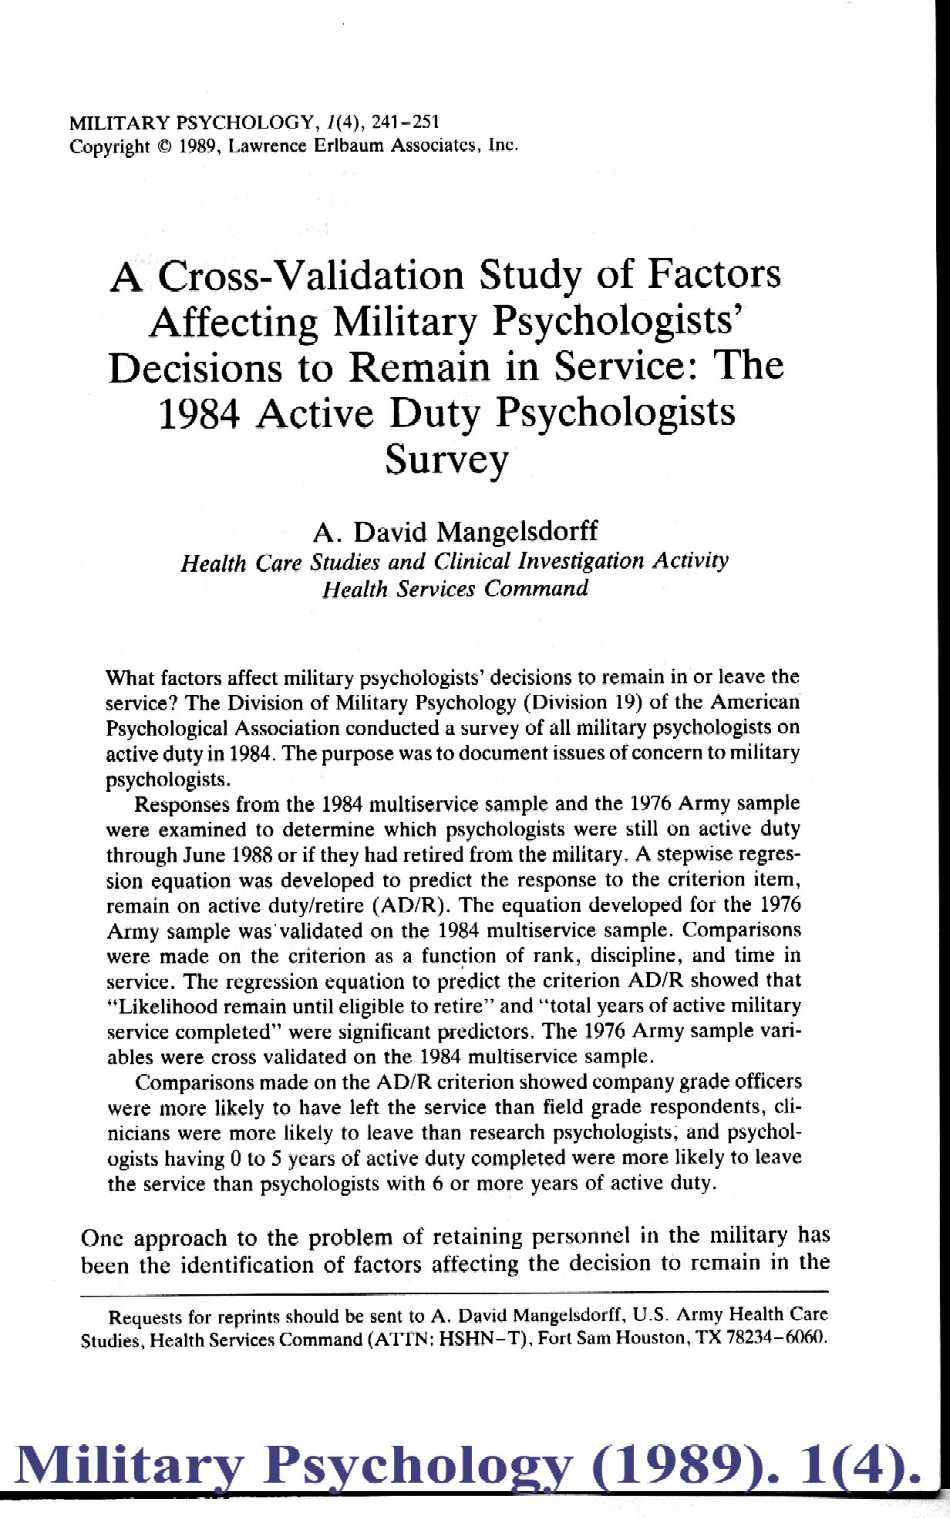 Military Psychology (1989): A cross-validation study of factors affecting military
psychologists' decisions to remain in service: the 1984 actuve duty psychologists survey